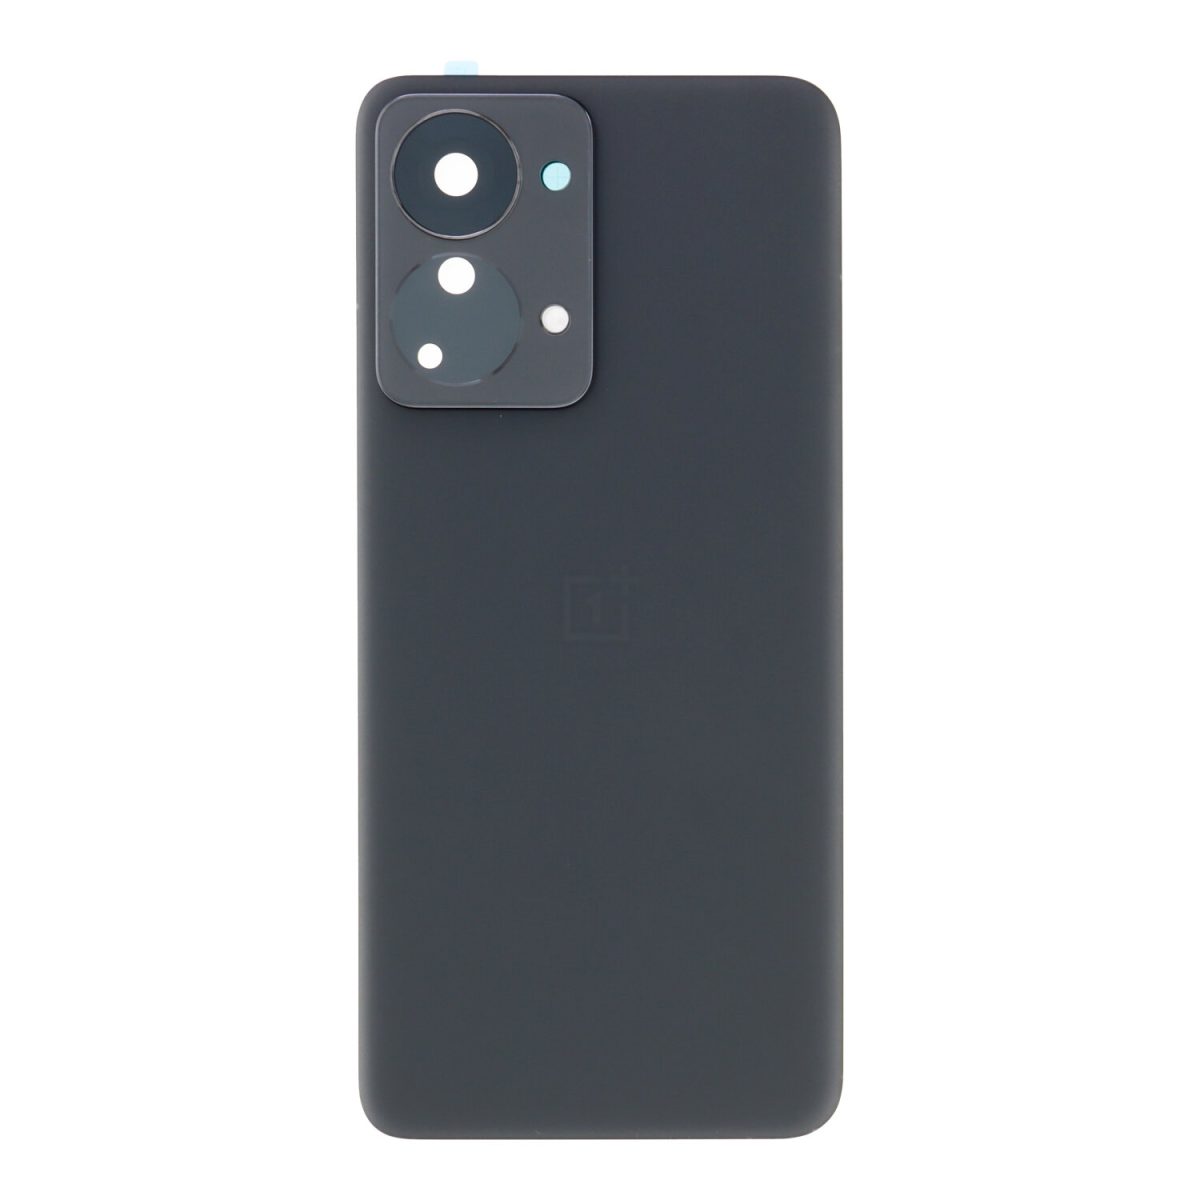 Backcover with Back Camera Lens for OnePlus Nord 2 5G - Black